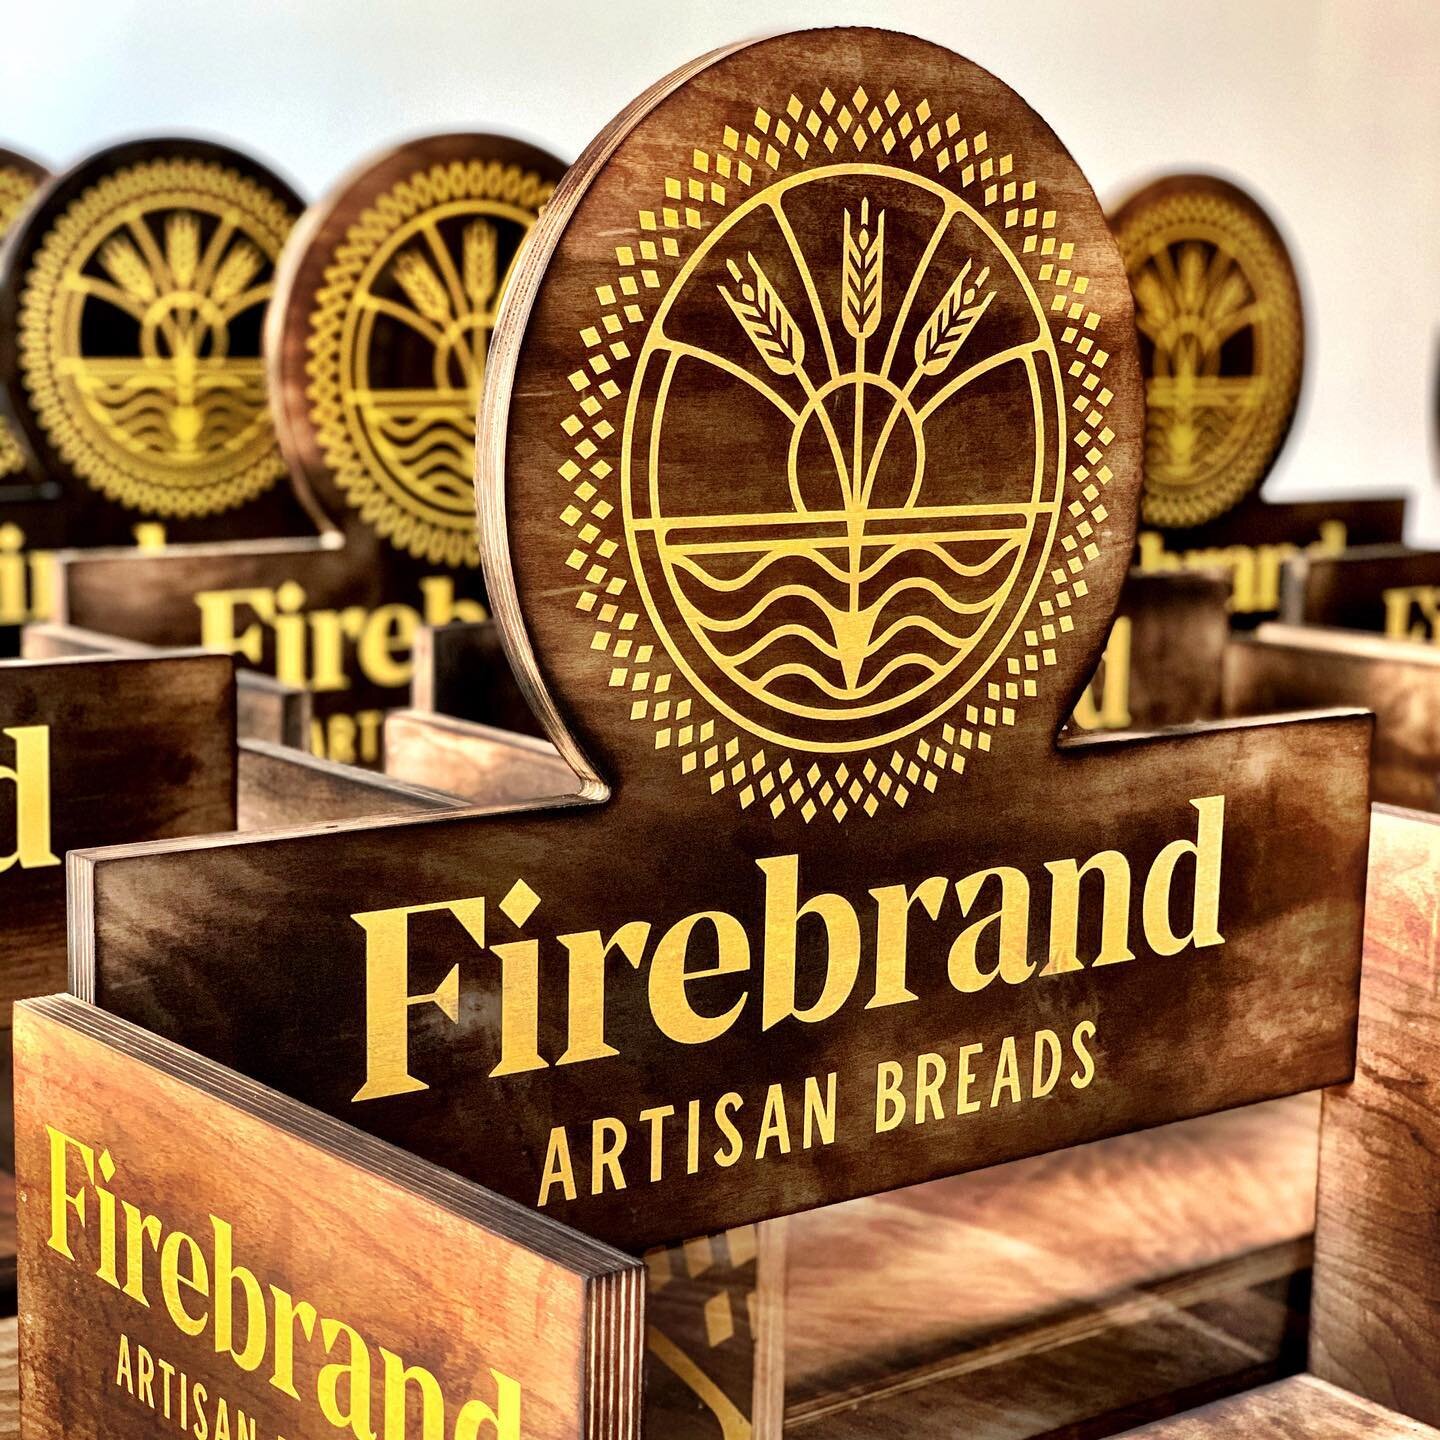 Fresh out the oven! @firebrandbread display showcasing uv printed birch wood thats been torched. Thankful to work with local crew and support @majorminor. #makebread #firebrand #oakland #storedisplay #burned #flatbedprinting #craft #birch #appleply #